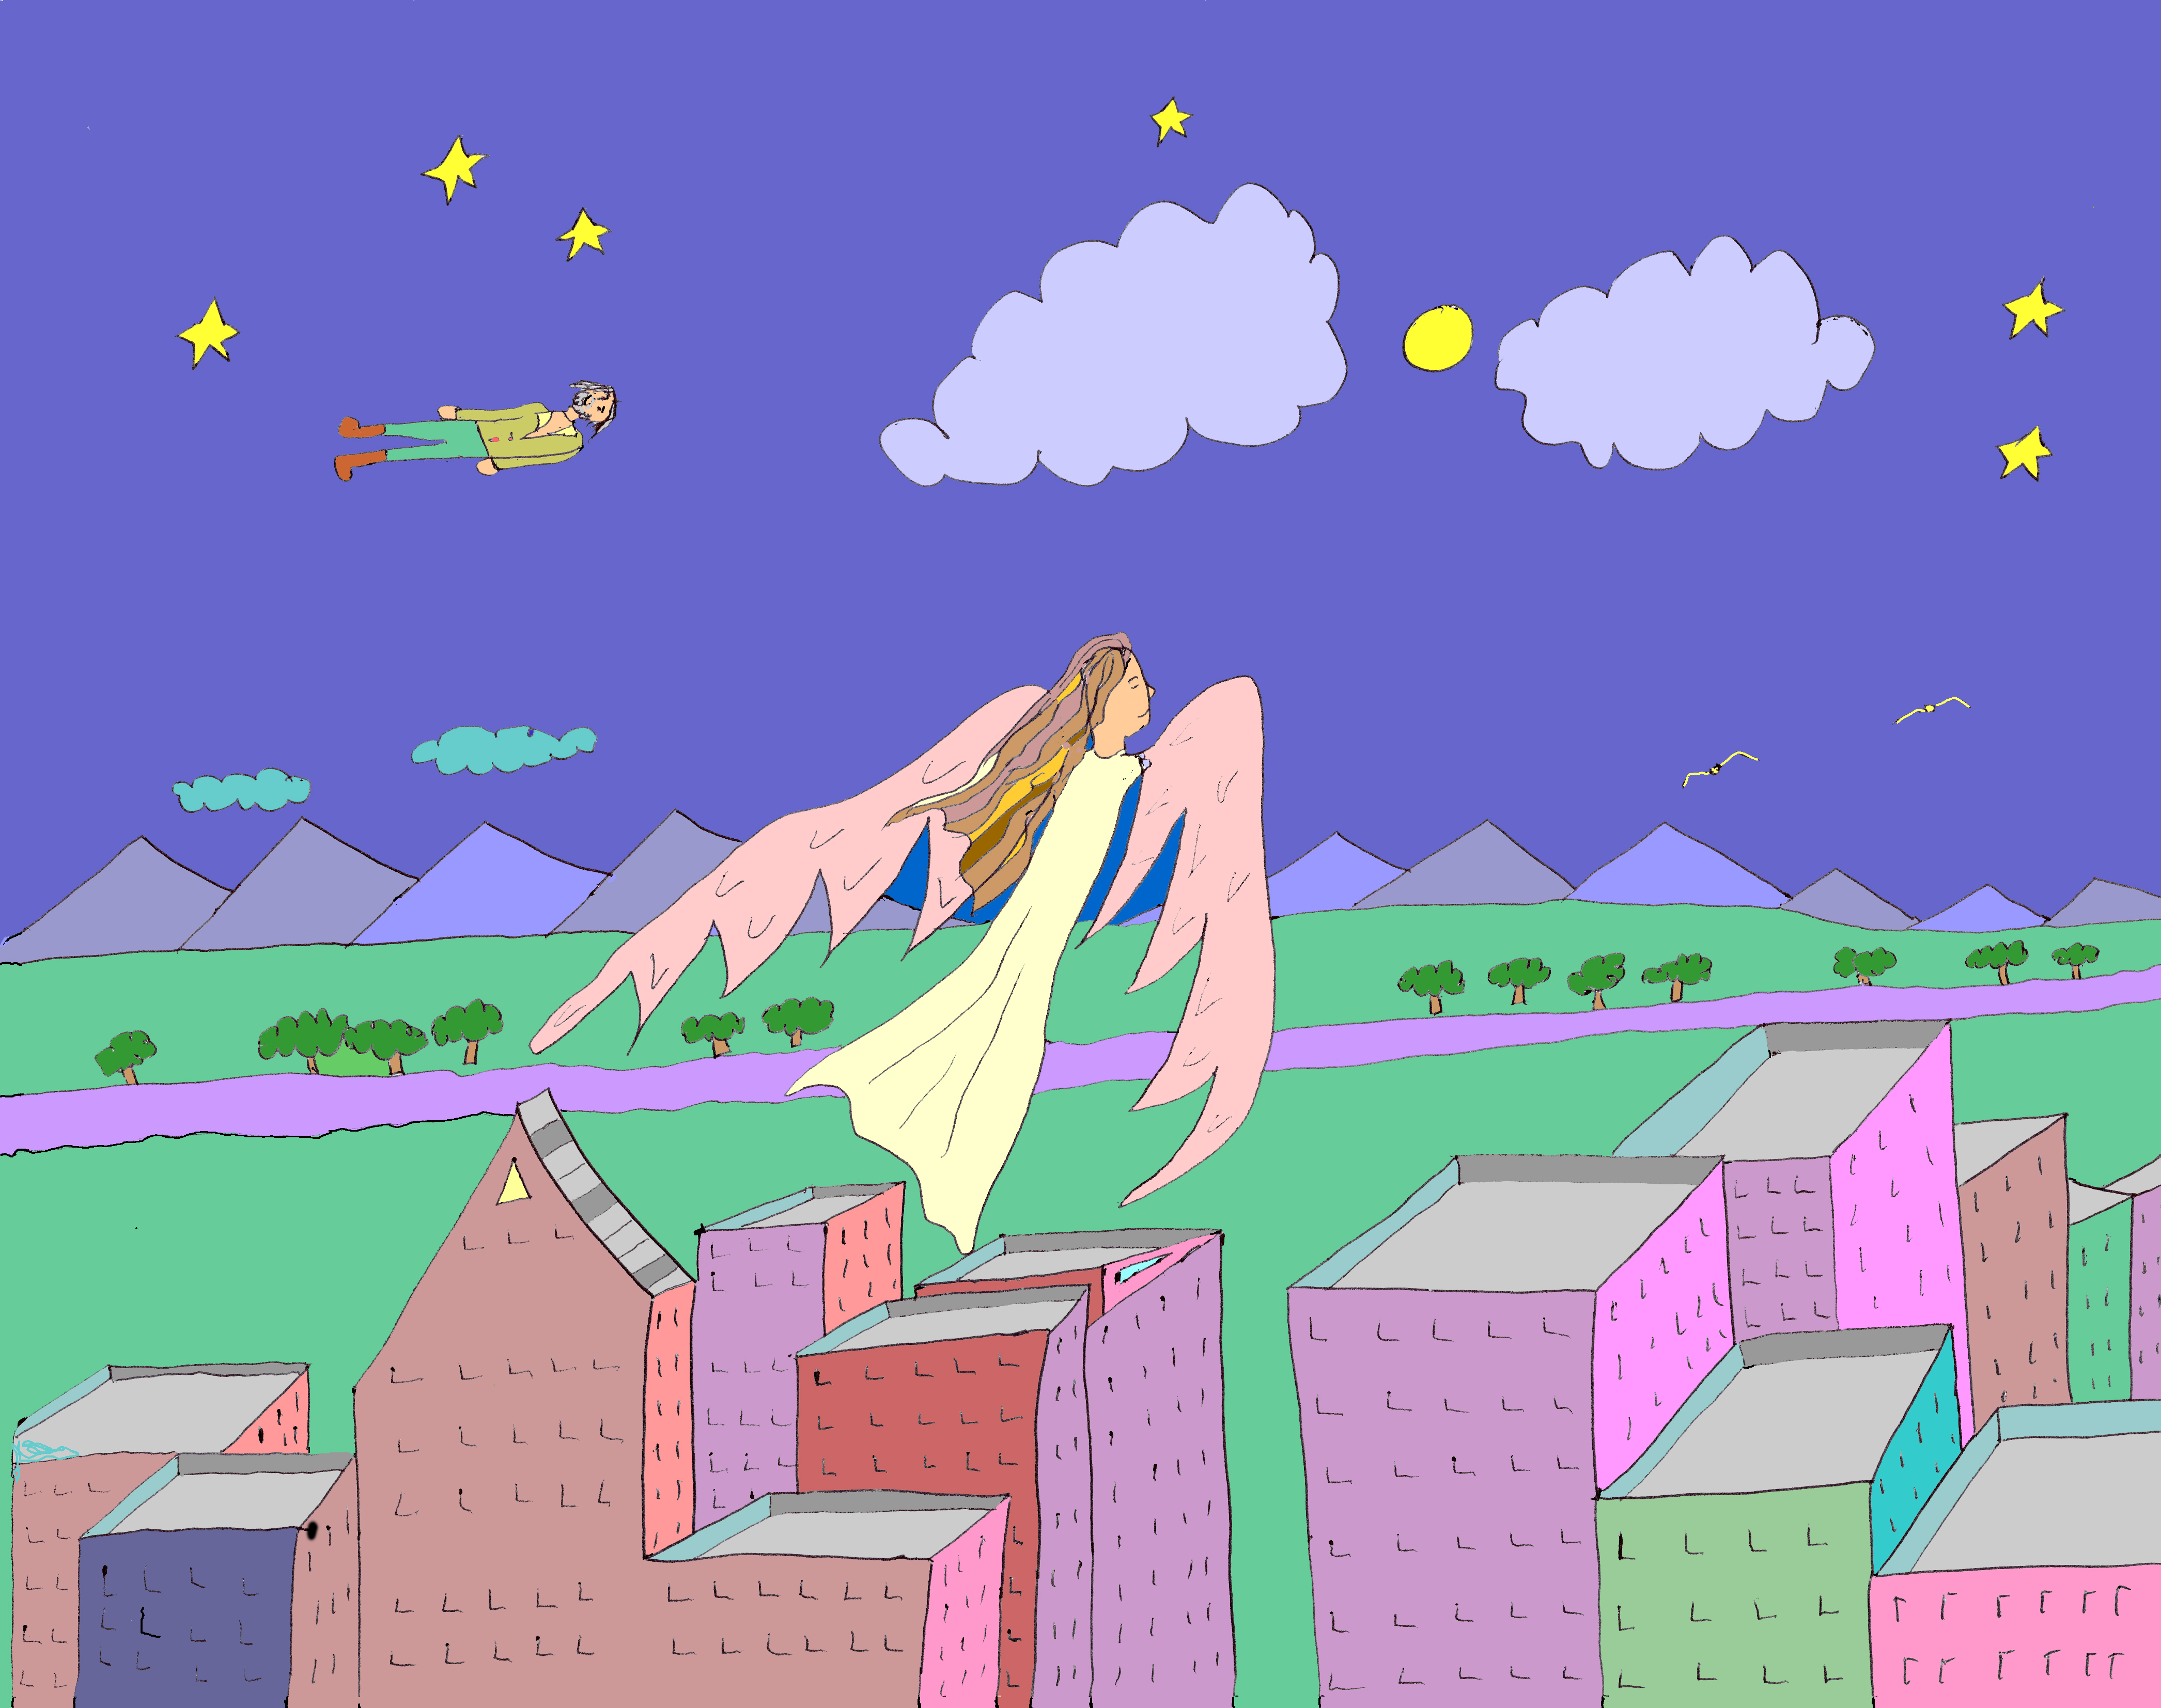 angel flying over cartoon style cityscape 